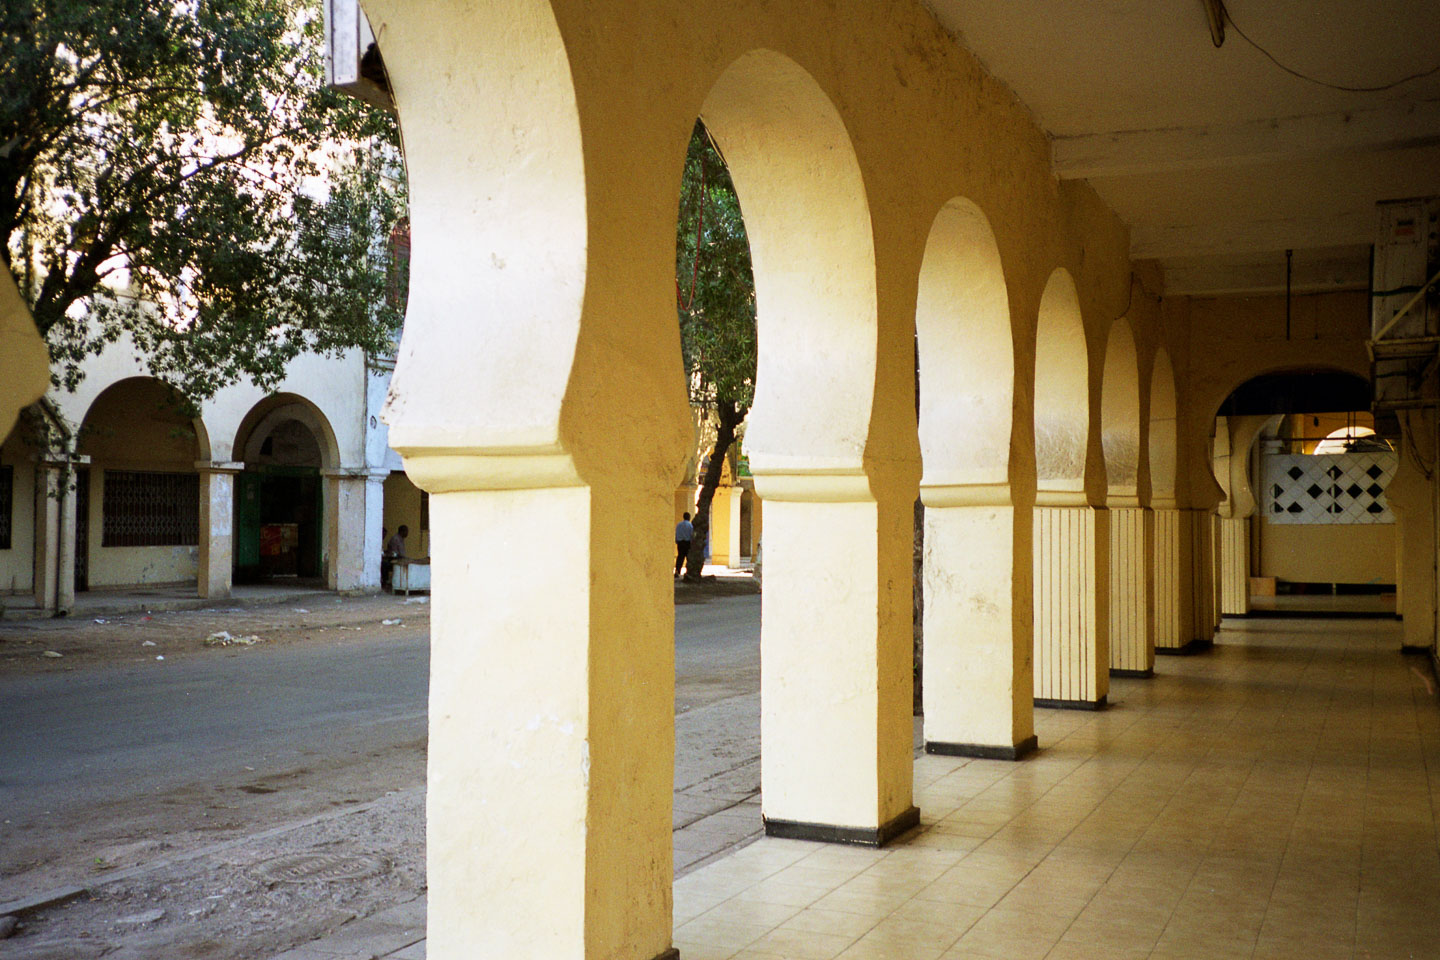 DJ05003-Typical-arches-in-Djibouty-City.jpg